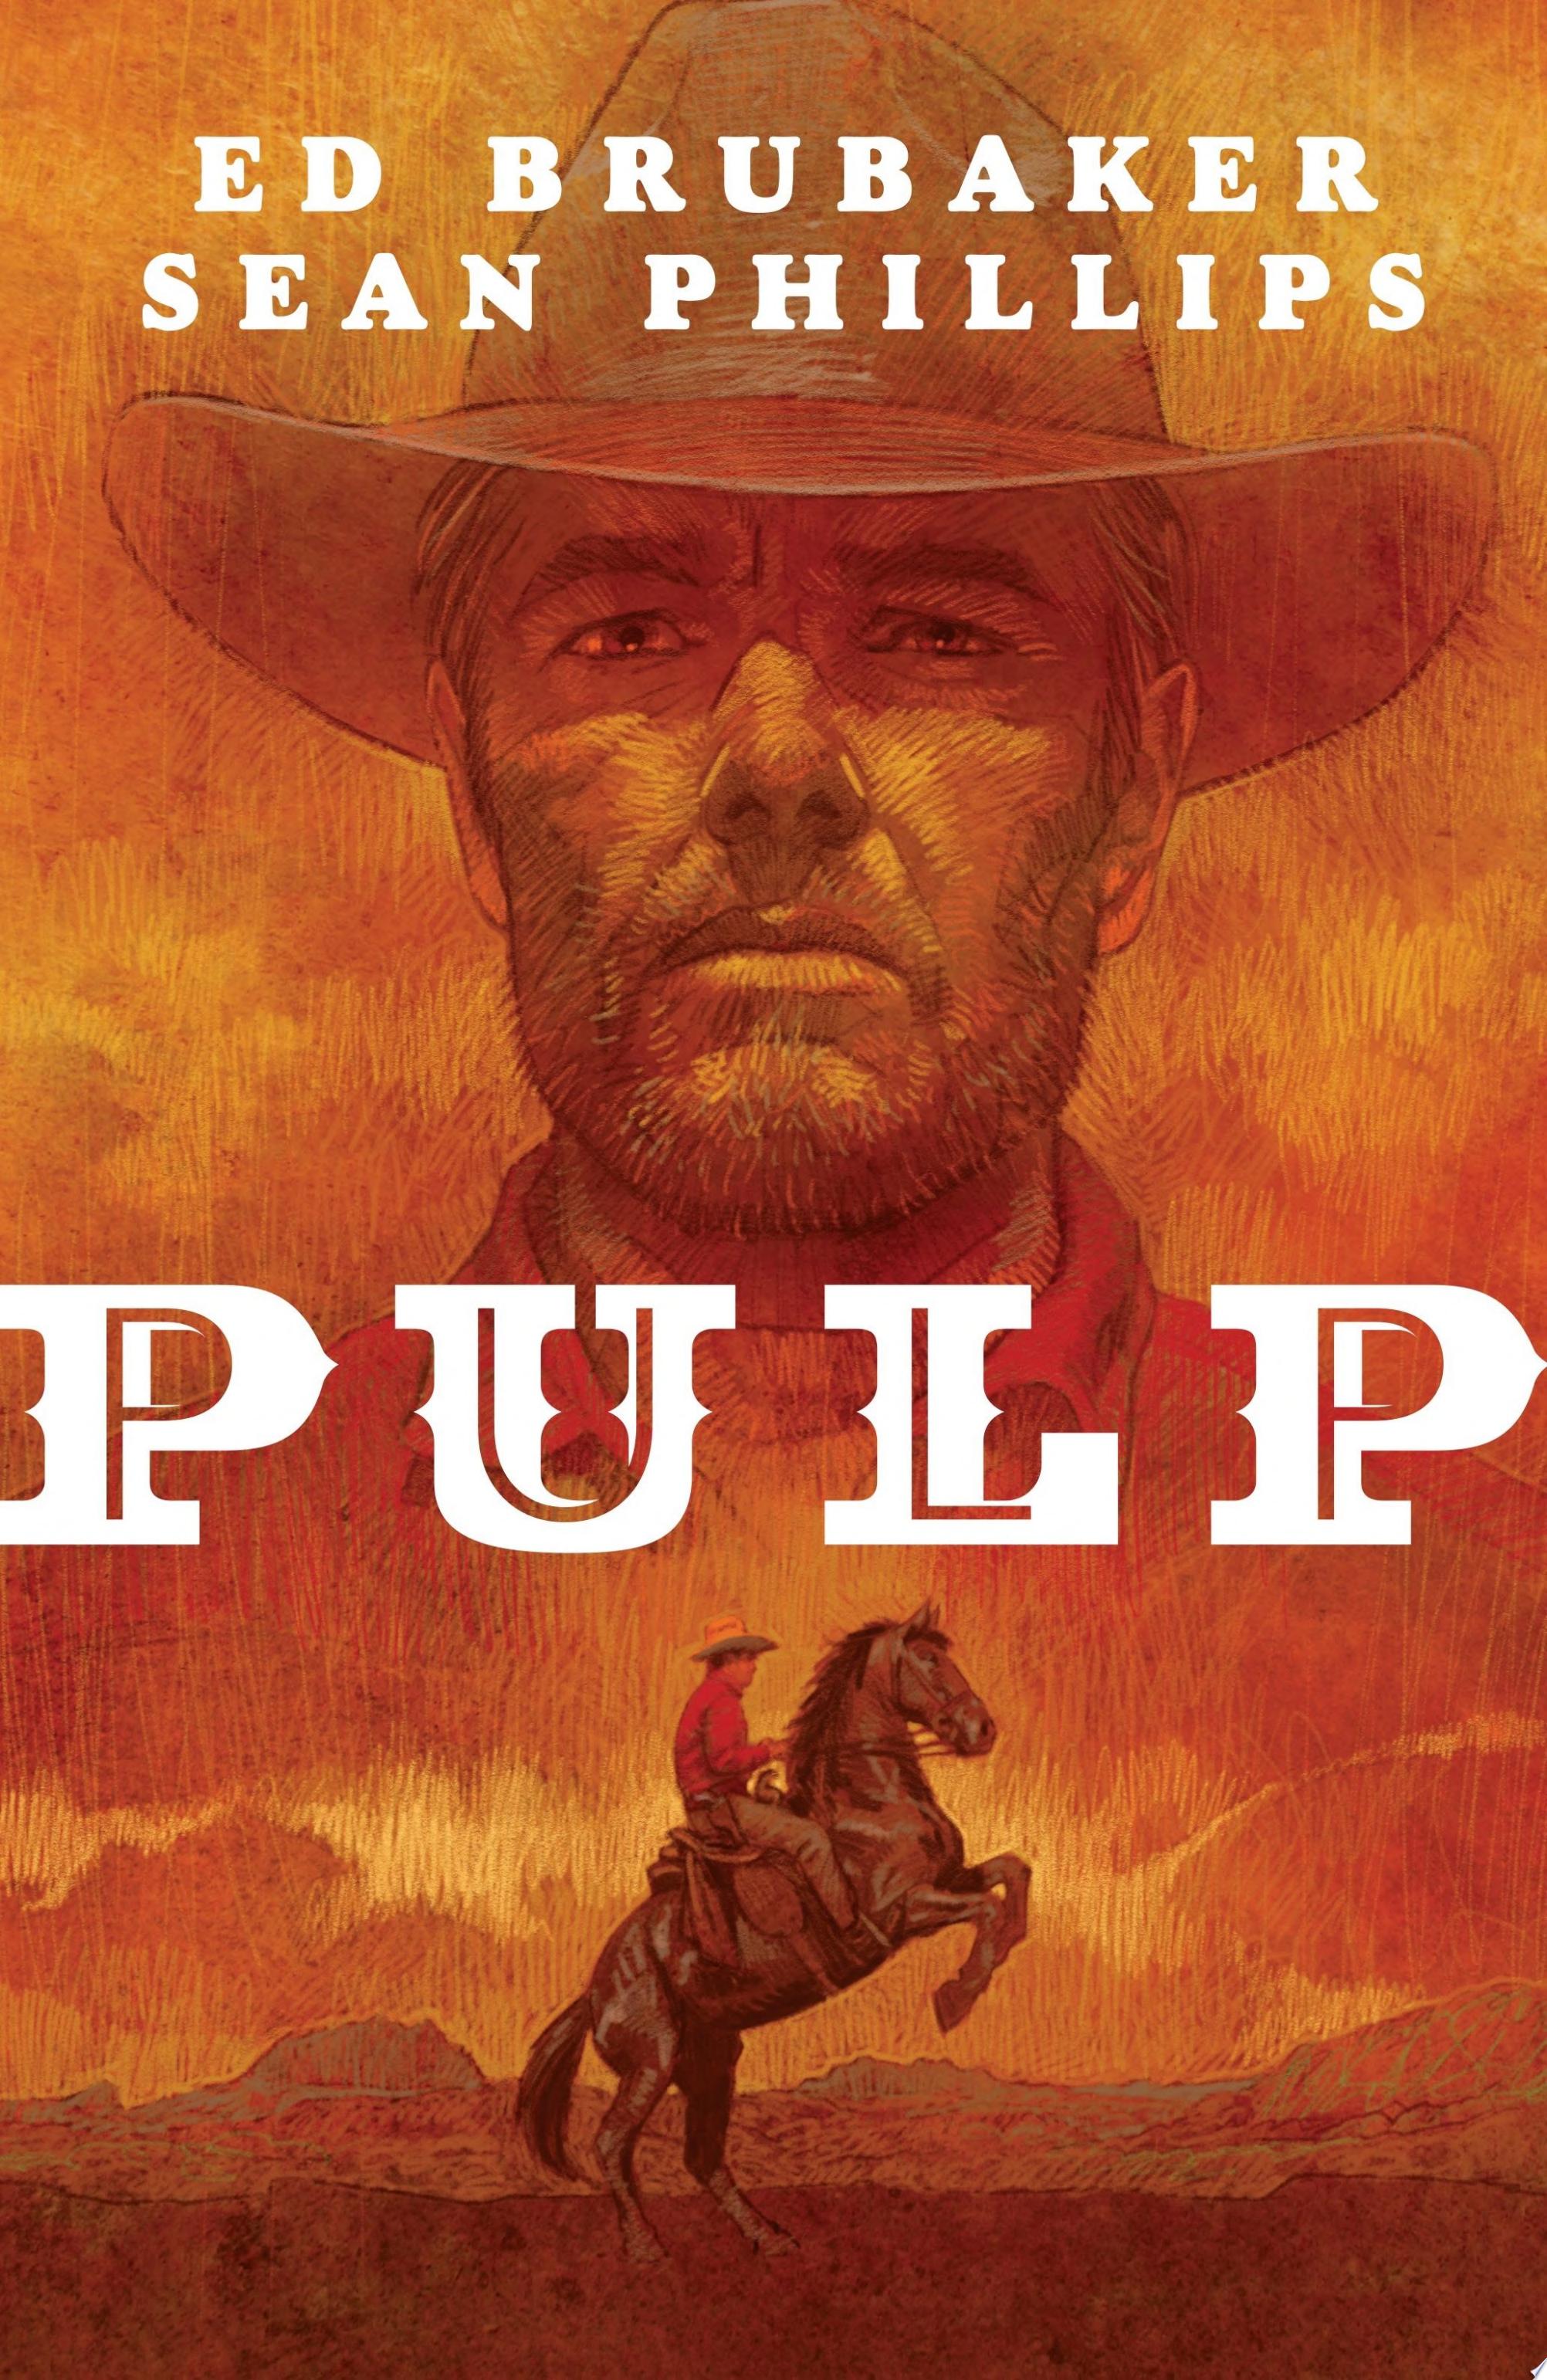 Image for "Pulp"